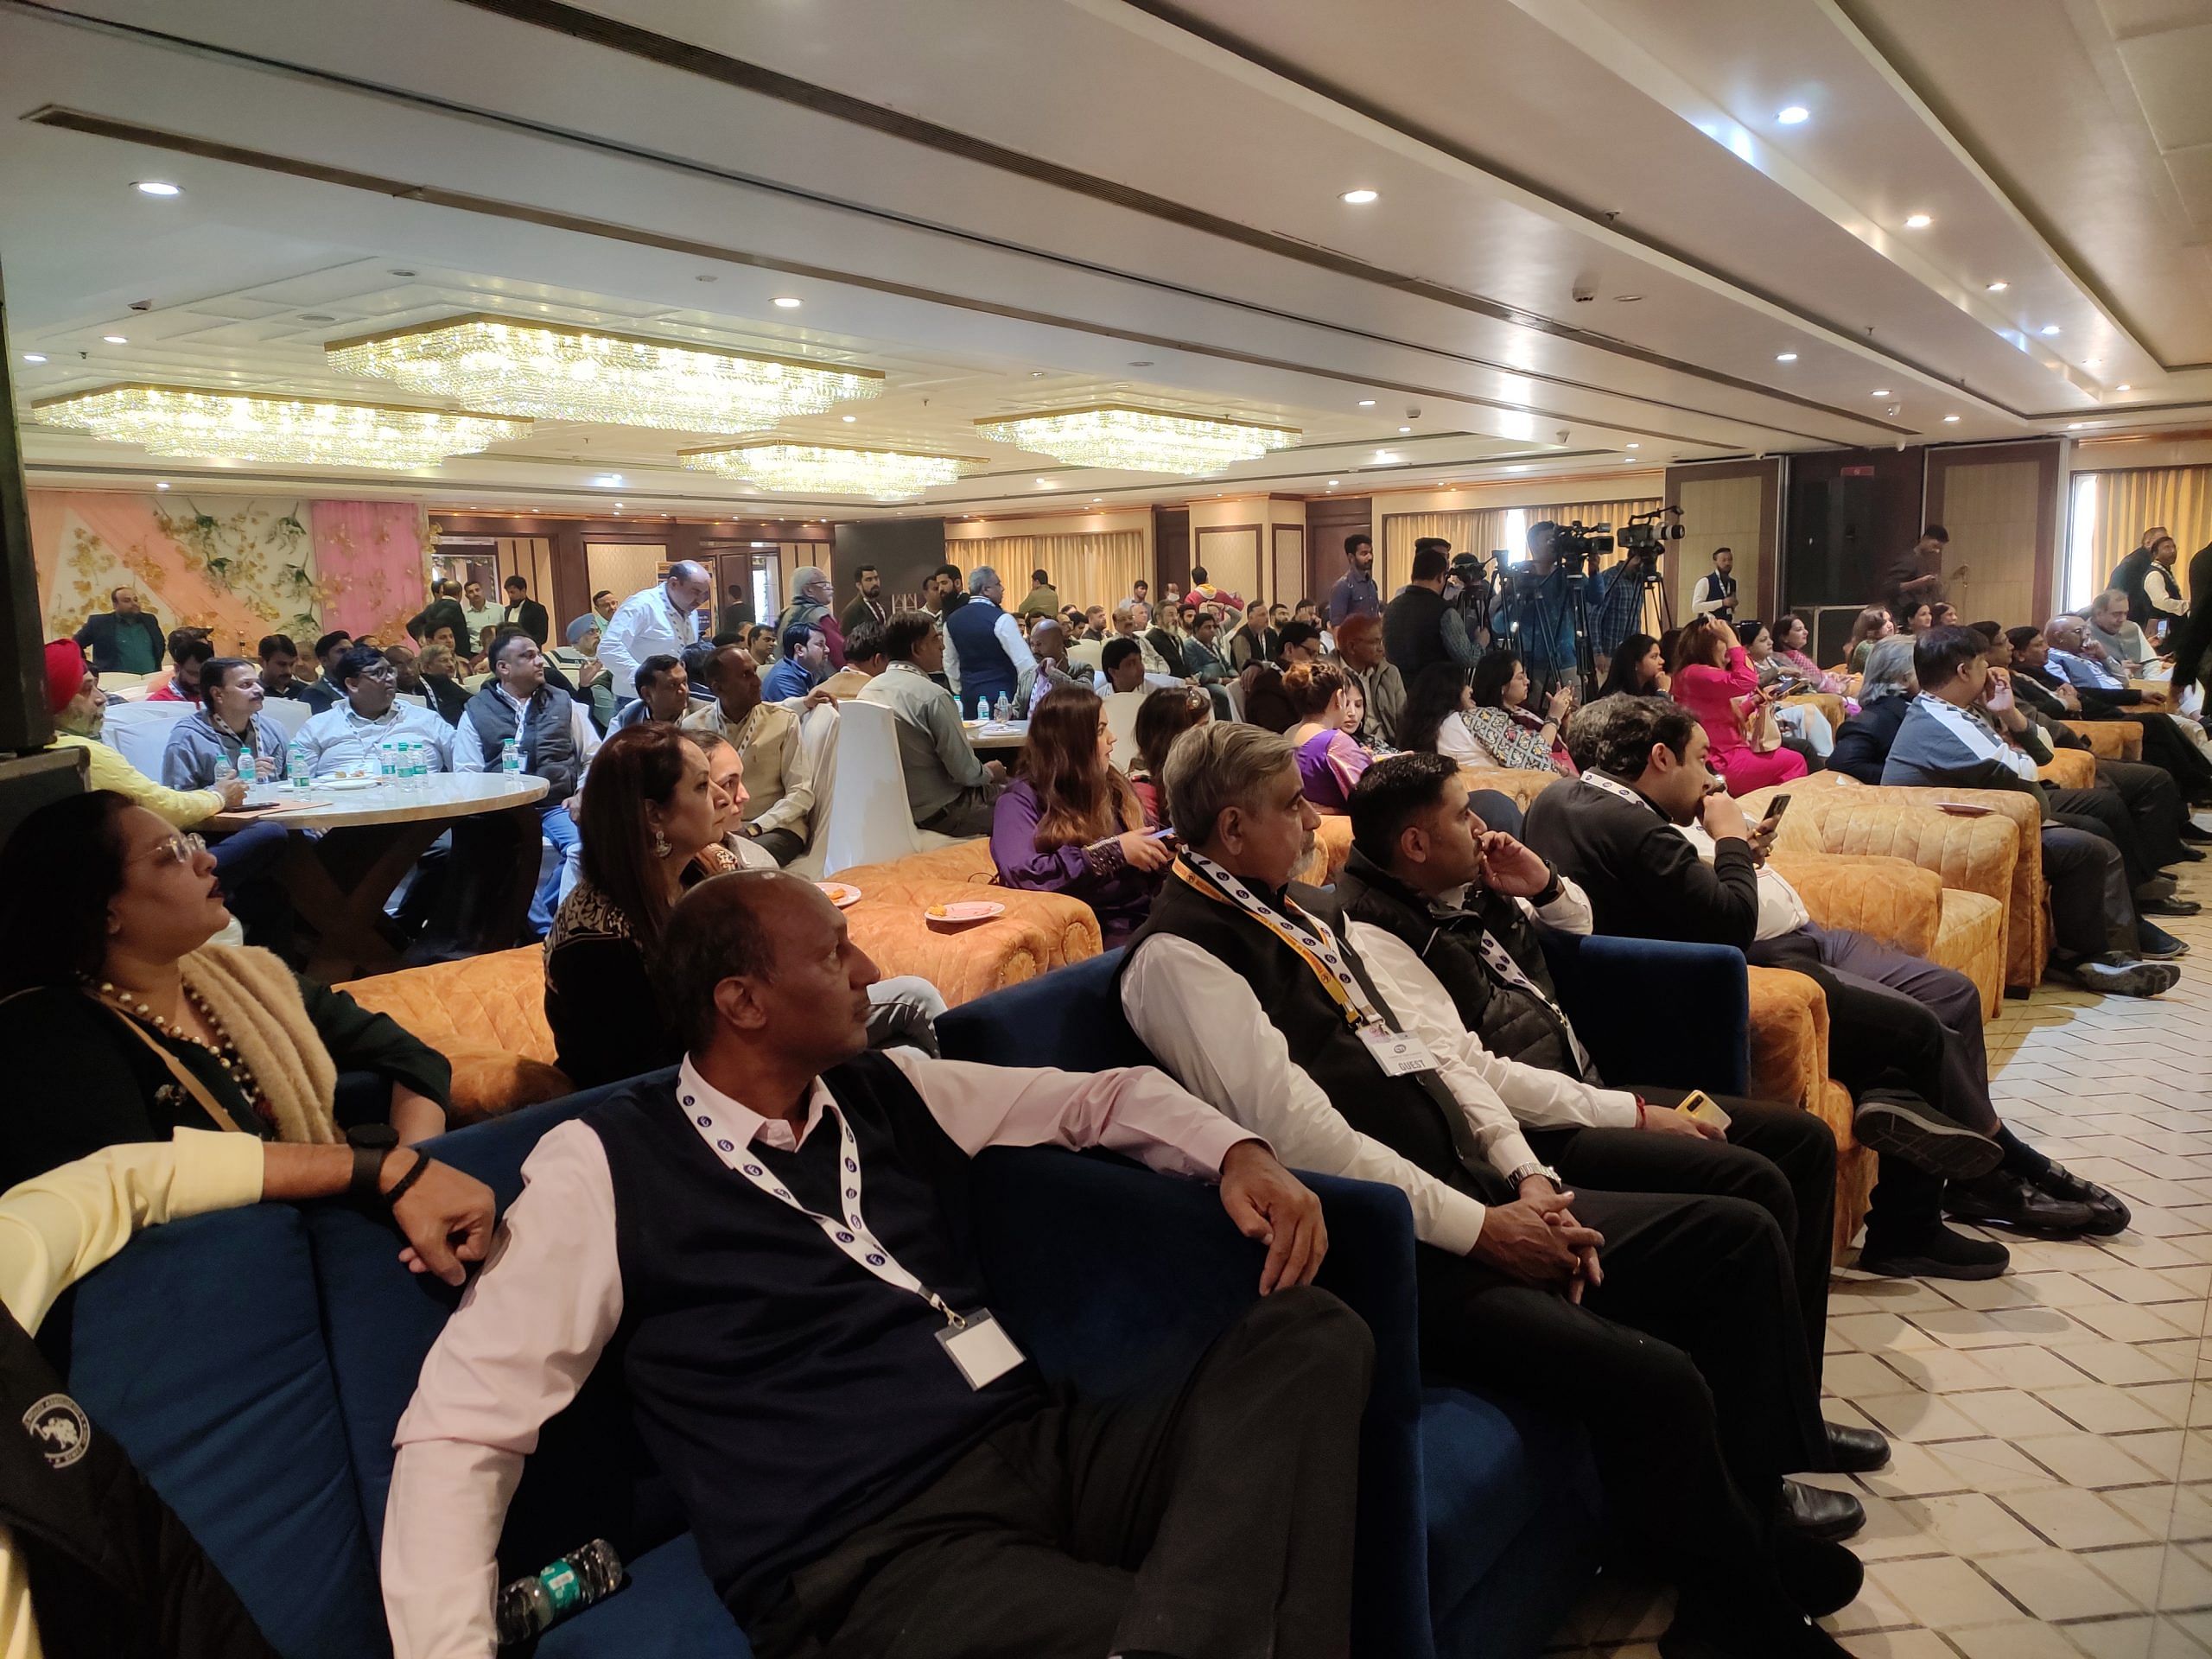 Representatives of various trade associations listen to the Delhi chief minister at the event on Friday | Sukriti Vats | ThePrint